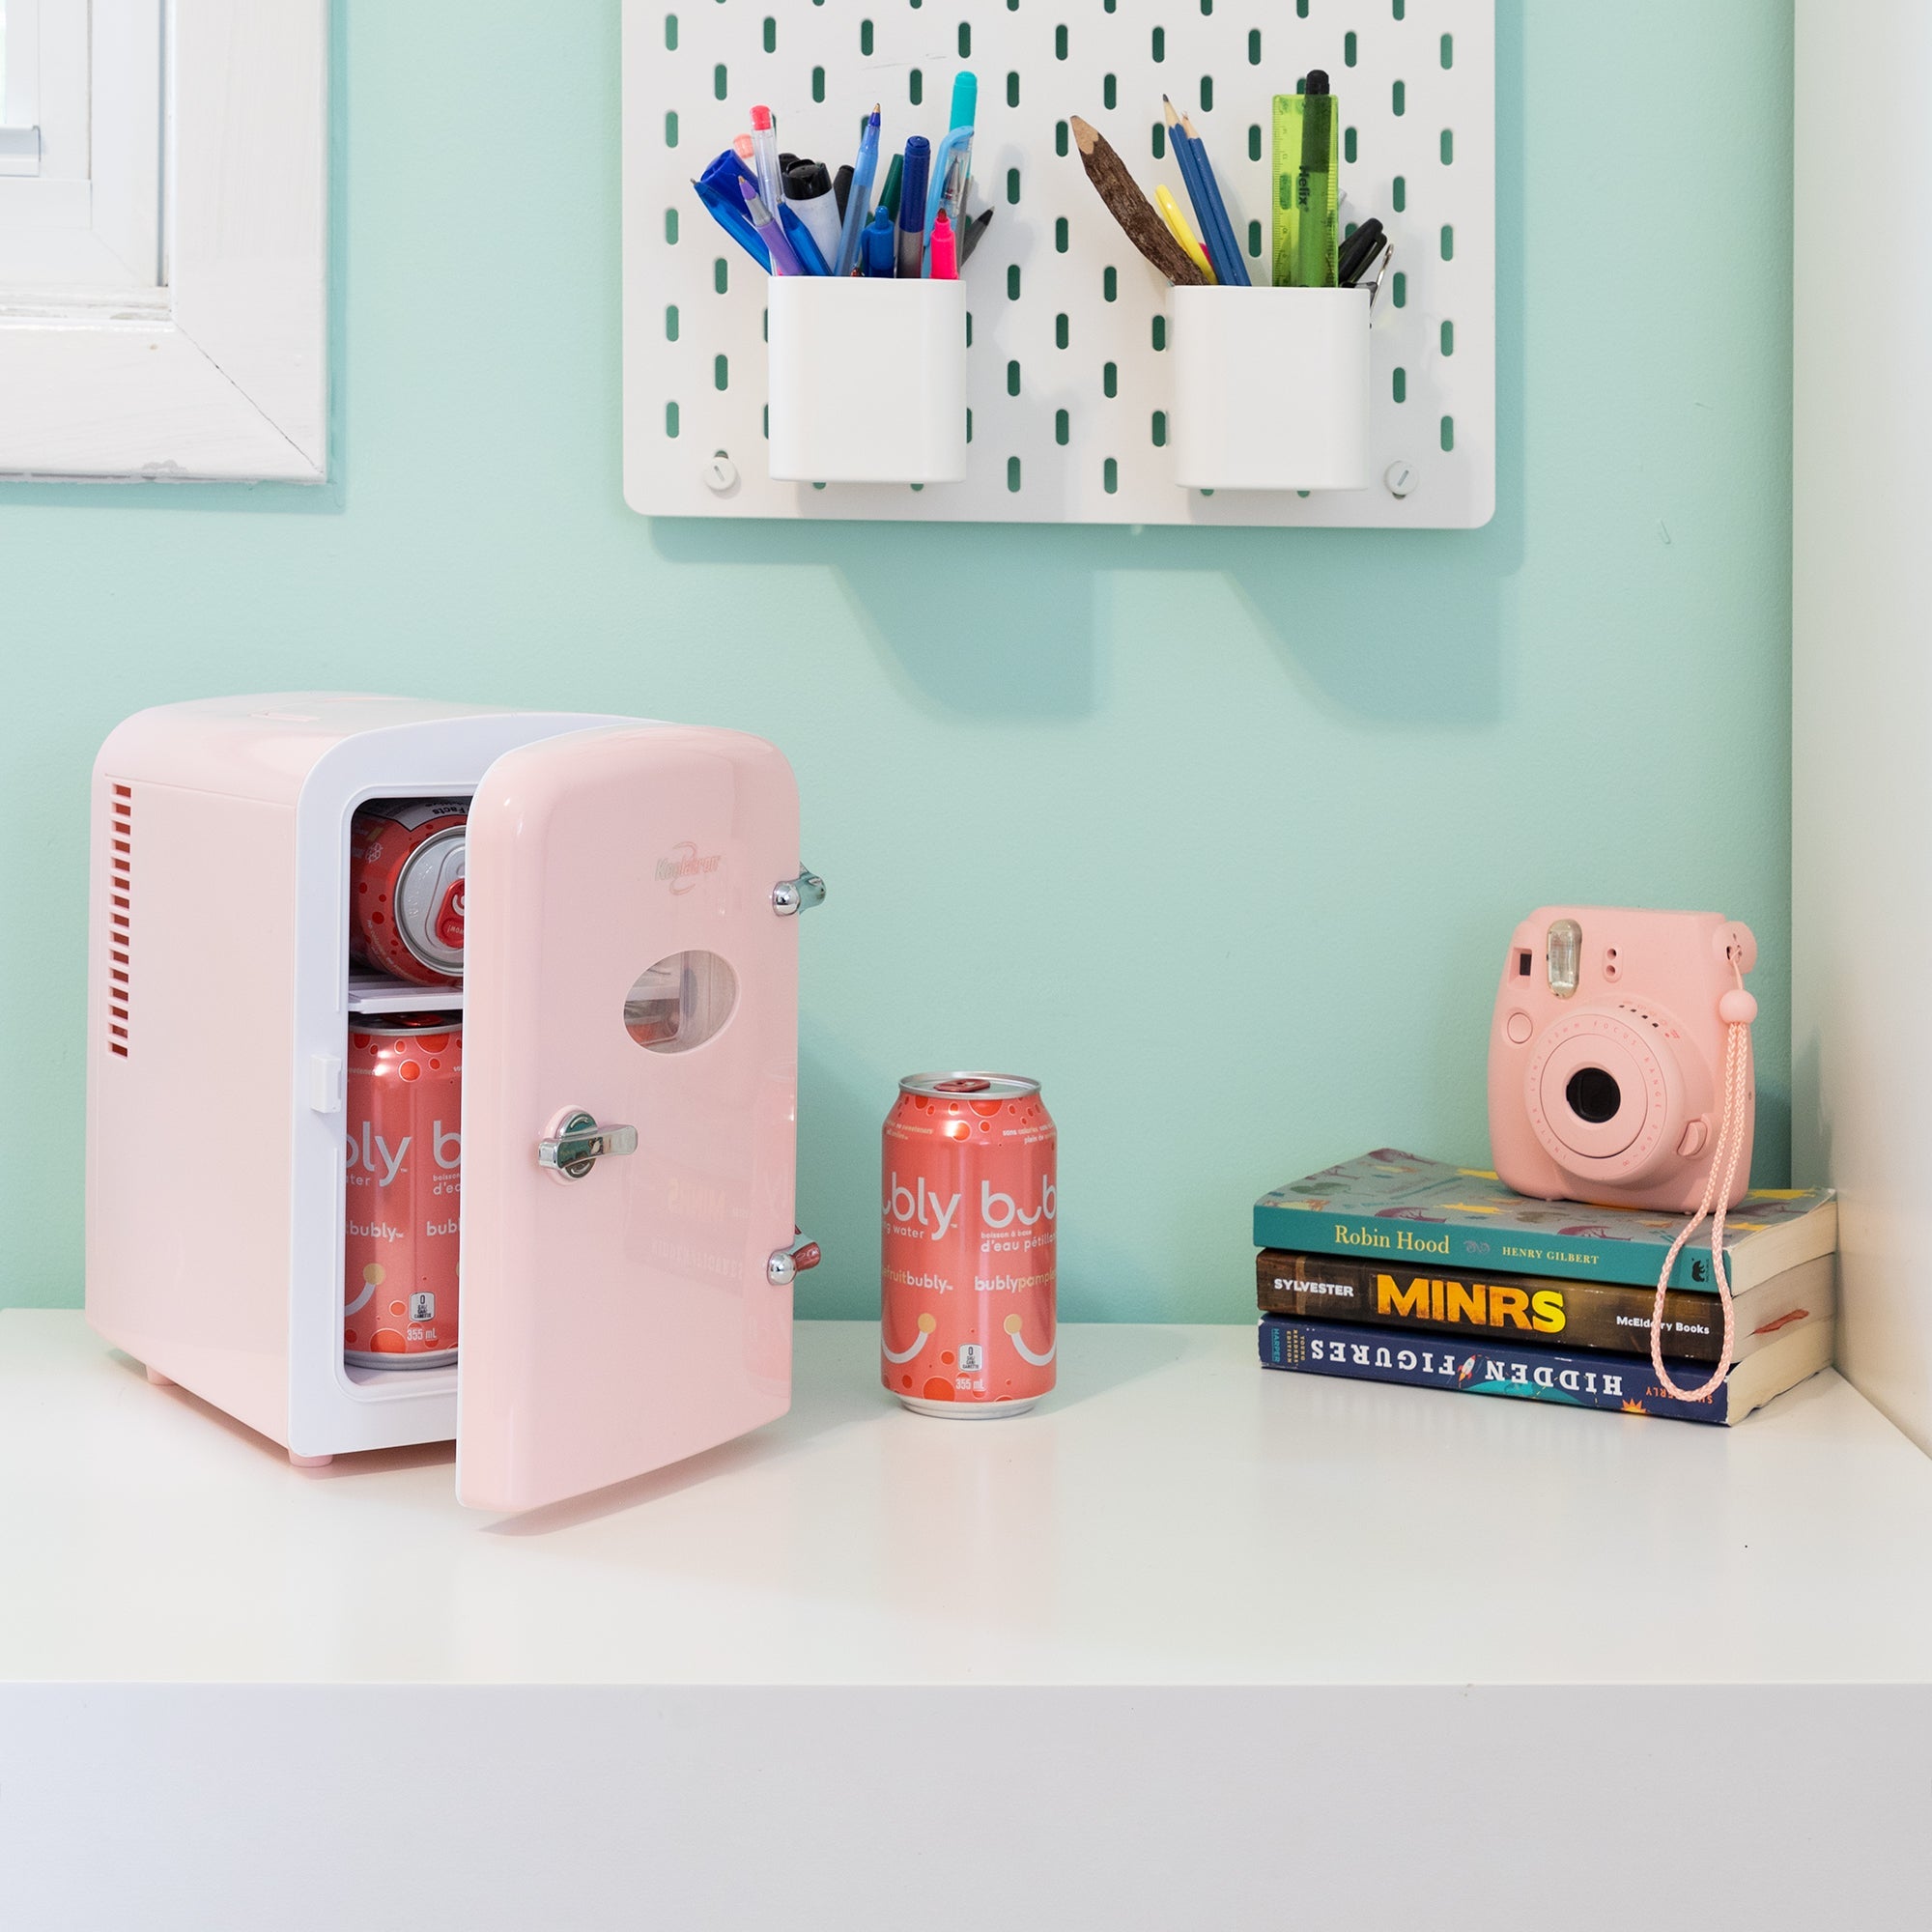 Lifestyle image of Koolatron retro 6 can mini fridge, partly open with cans inside, on a white desktop with an aqua wall behind. There is a can of soda, a stack of books, and a pink camera to the right of the fridge and two cups of pens and pencils attached to the wall above